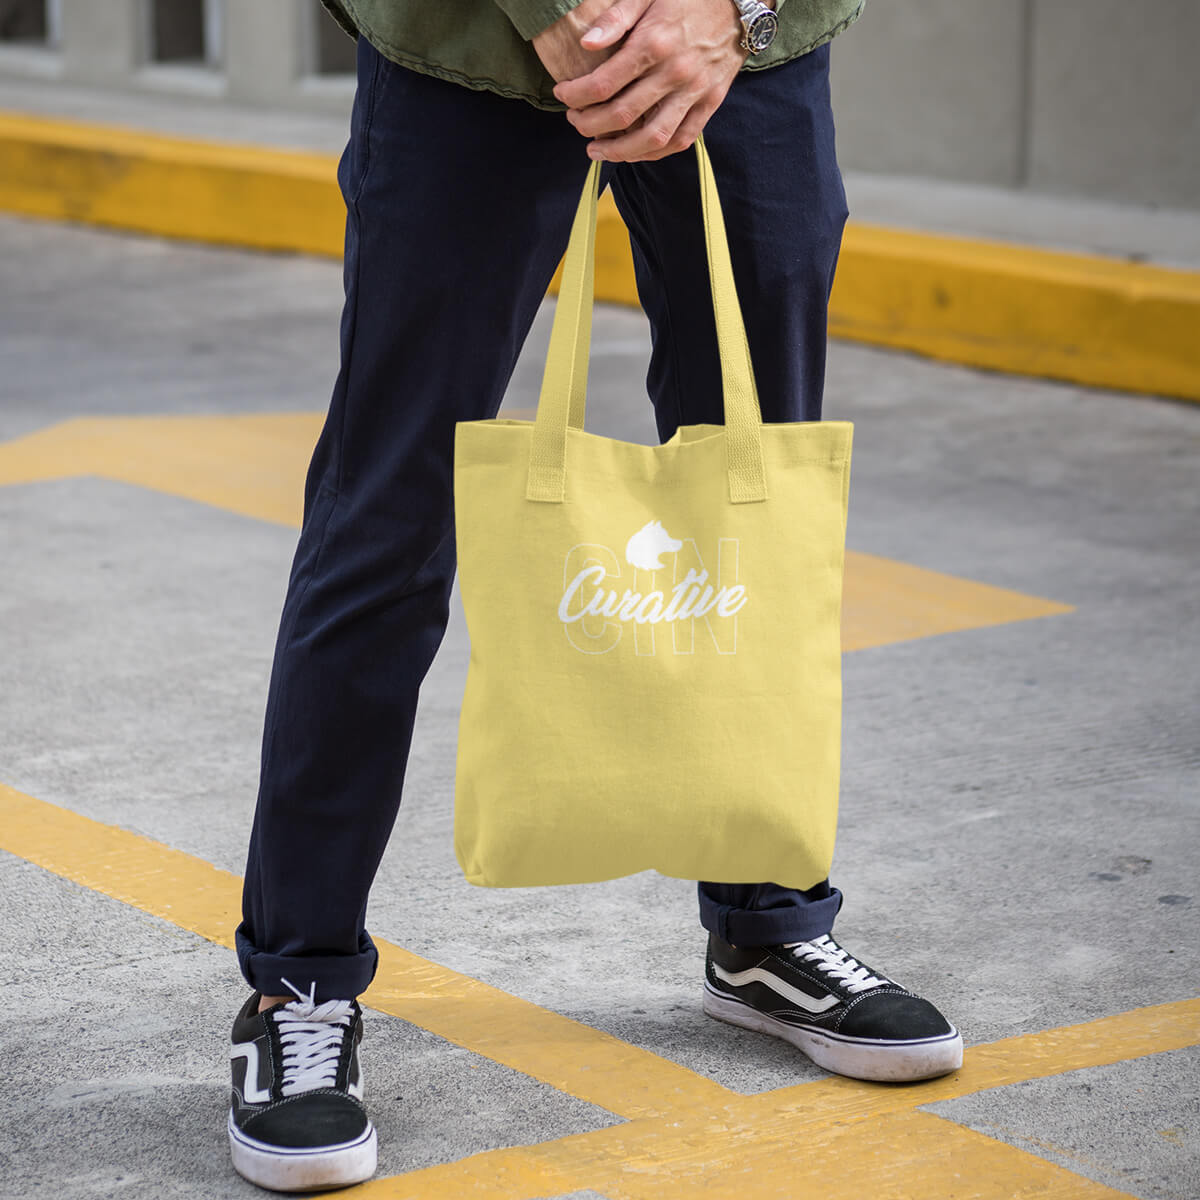 Yellow with white imprint custom promotional tote bags by curative printing